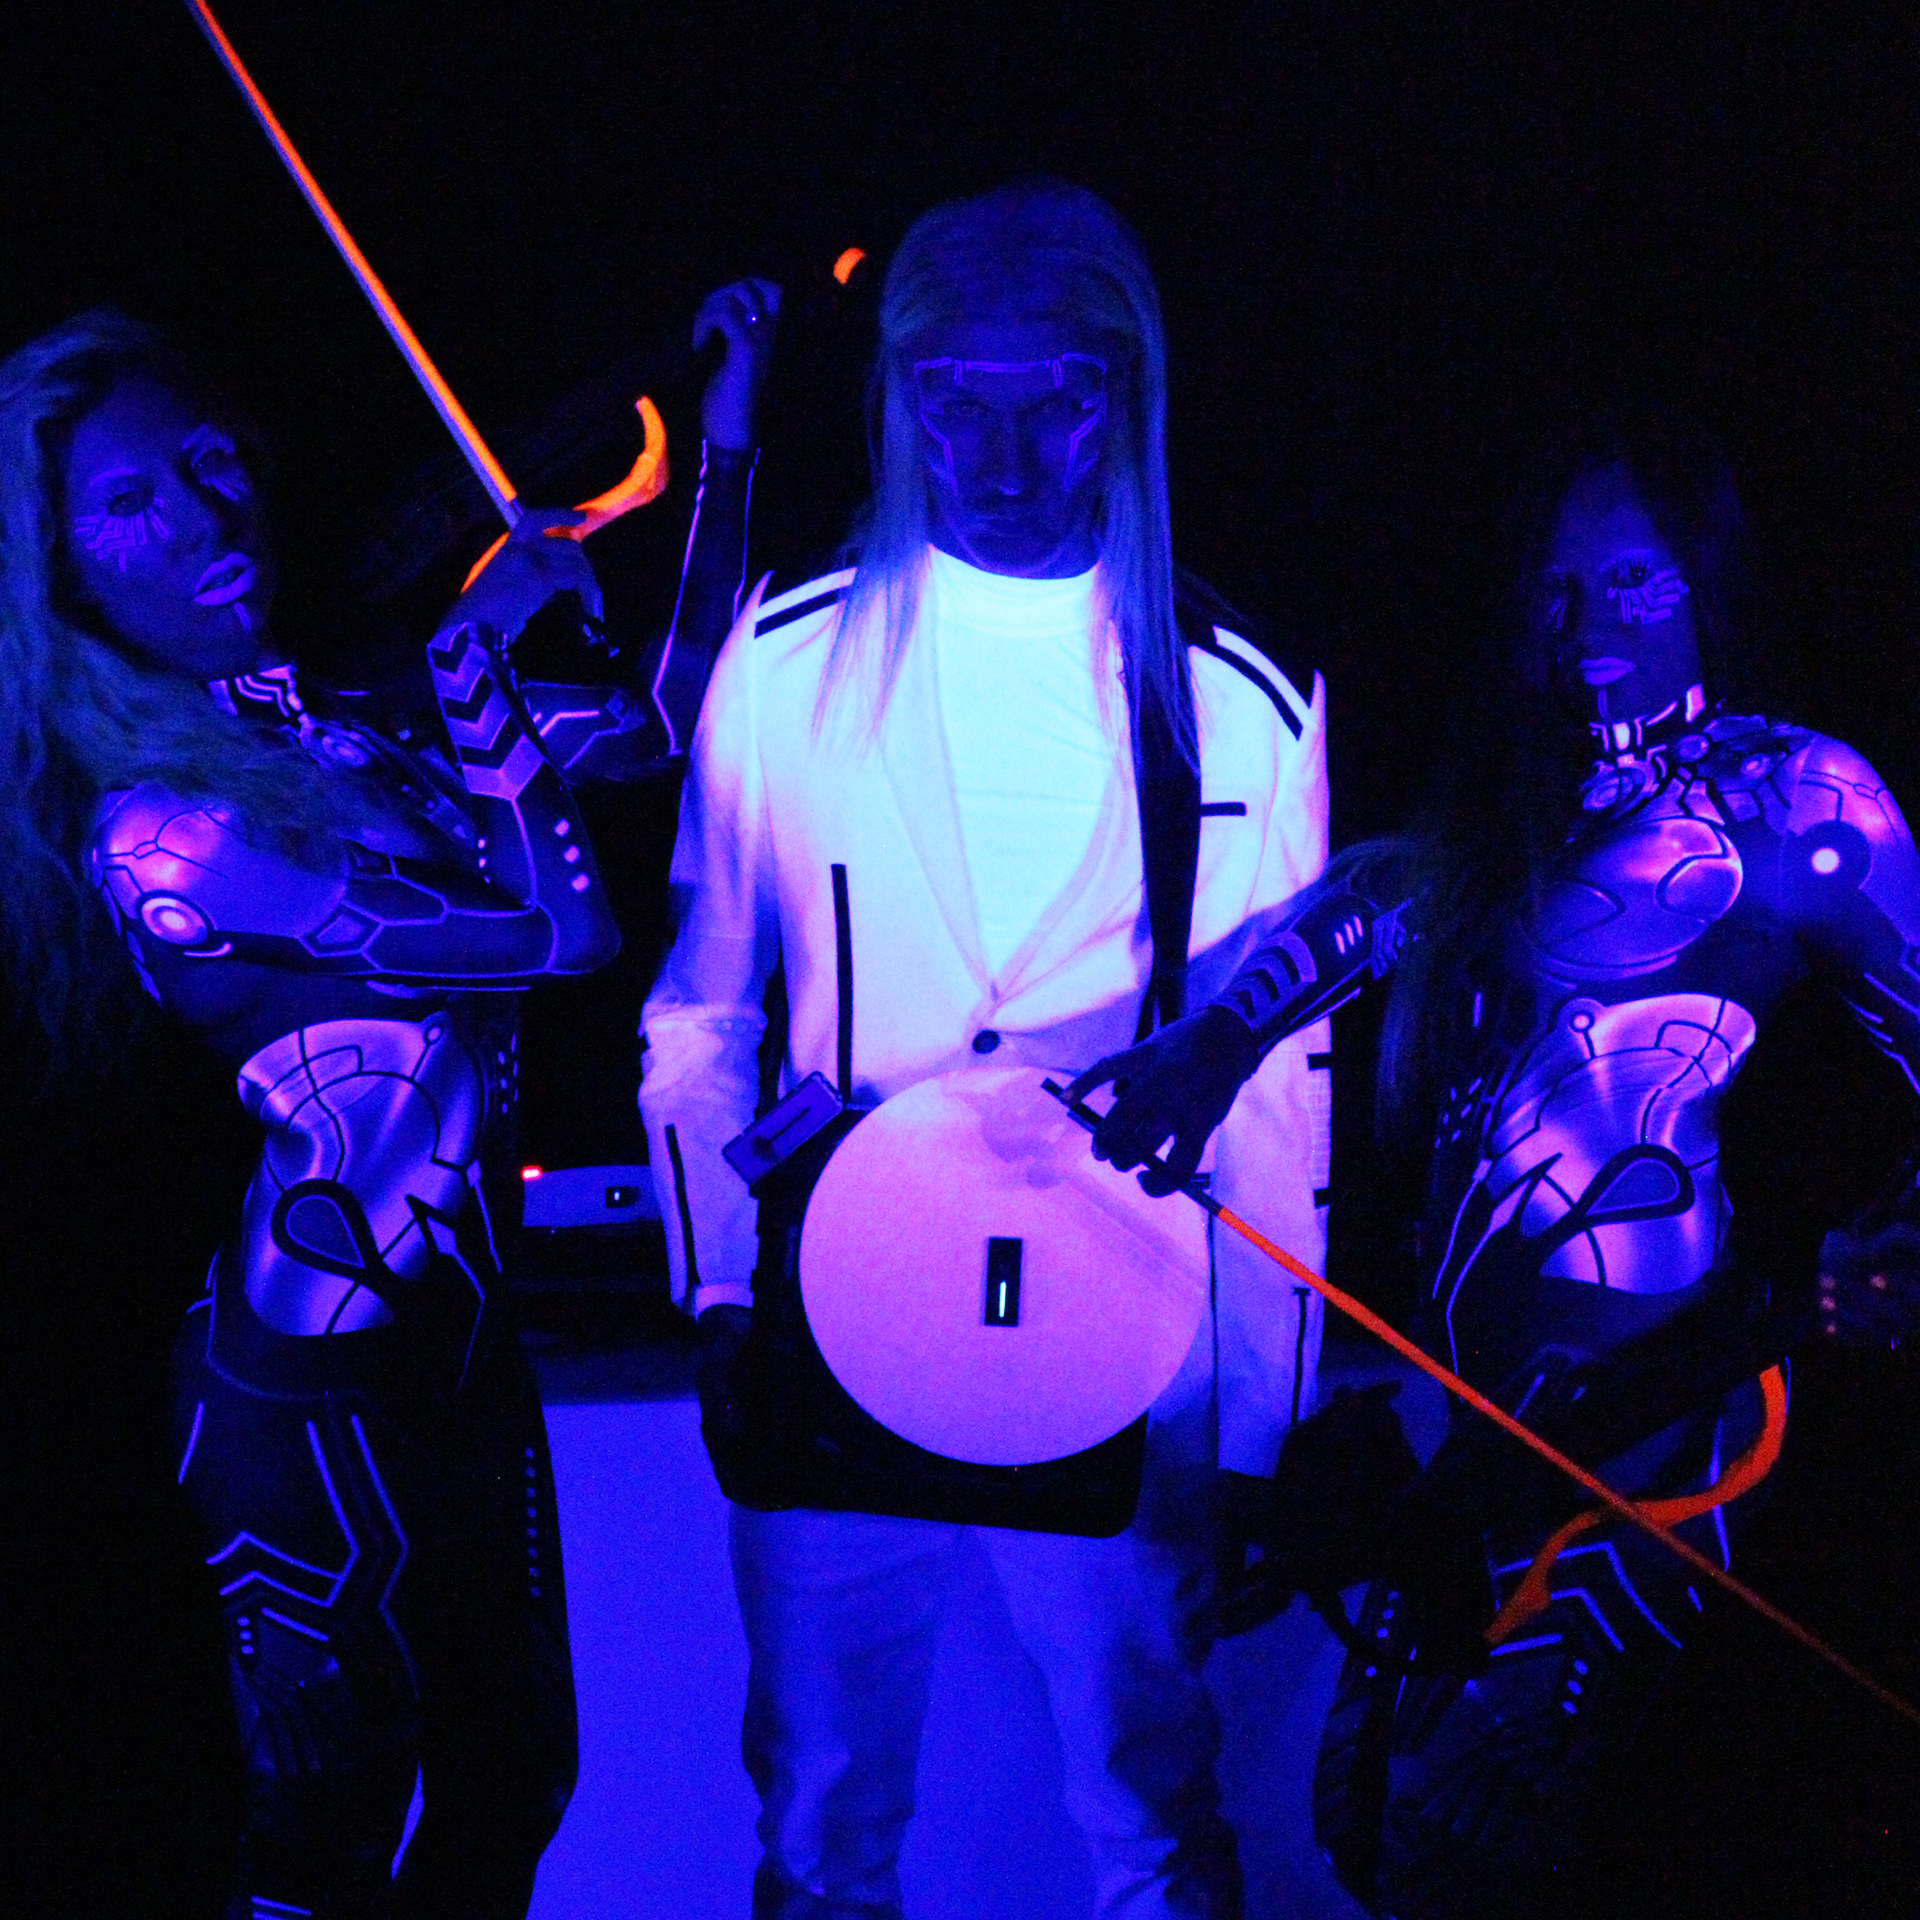 3 musicians lit UV Black Lights creating neon glow on their catsuits and corporate dress whites. dj holding portable turntable Violinists holding glow in the dark violins #vynilyn #lrbaggs #cordialcablesusa #codabow #thomastikinfeld #dollskillclothing #yamahaelectricviolin #justfabstyle #yamahamusic #electricviolin #electricviolinists #electricviolinist #aliens👽 #notfromthisworld #dancingviolinist #djculture #djviolinist #djviolin #femaleartist #femalemusicians #longhairedman #followusonyoutube #vinylart #bookmorewomen #eventplanner #eventplanning #eventprofs #meetingprofs #corporateeventplanner #meetingplanner #corporateevent #zoomhappyhour #virtualevents 